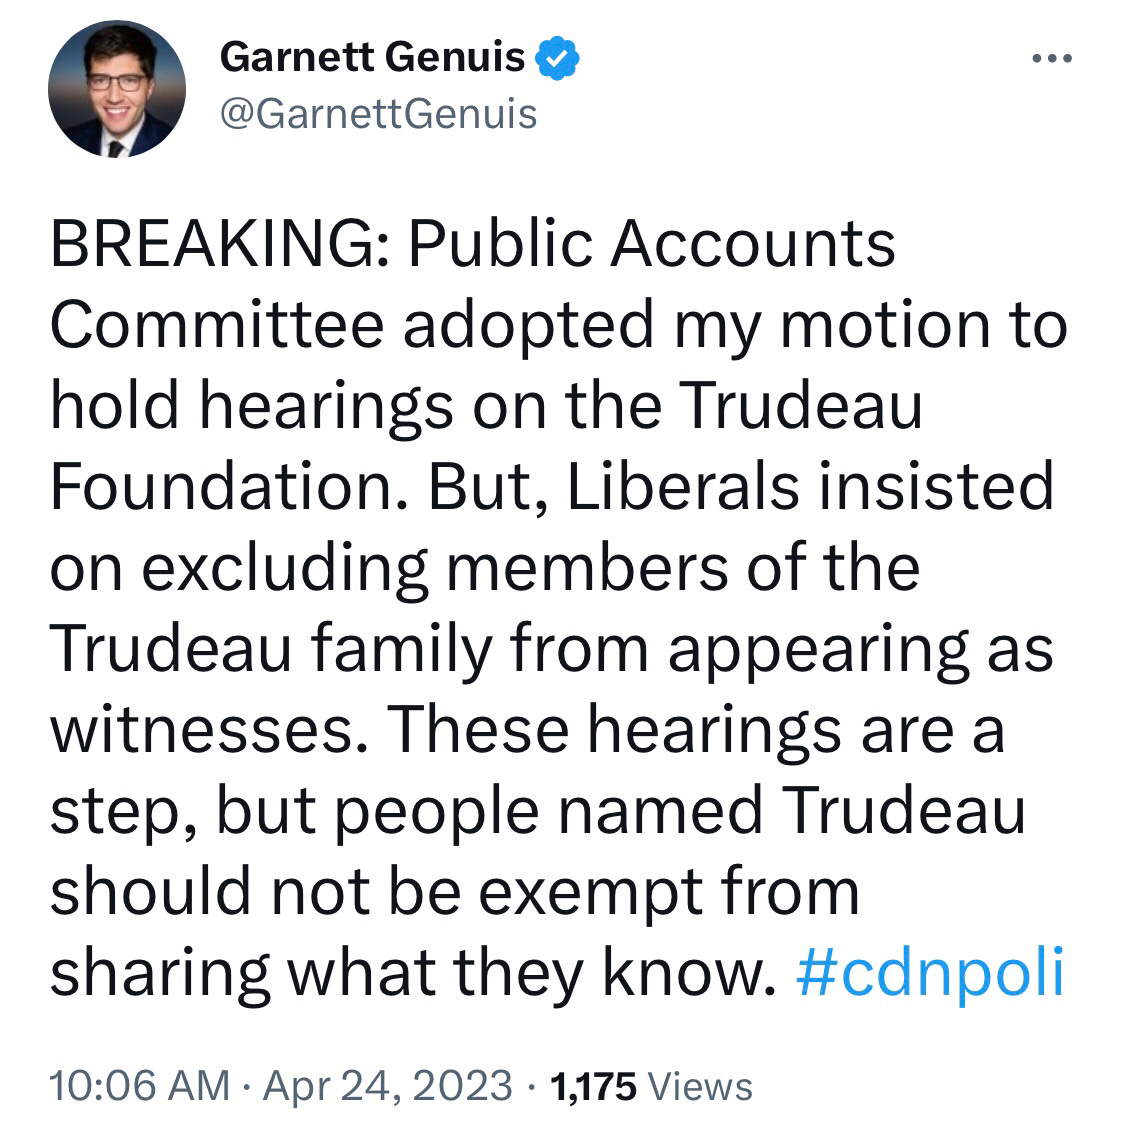 May be an image of 1 person and text that says 'Garnett Genuis @GarnettGenuis … BREAKING: Public lo Accounts Committee adopted my motion to hold hearings on the Trudeau Foundation. But, Liberals insisted on excluding members of the Trudeau family from appearing as witnesses. These hearings are a step, but people named Trudeau should not be exempt from sharing what they know. #cdnpoli 10:06 AM Apr 24, 2023 1,175 Views'